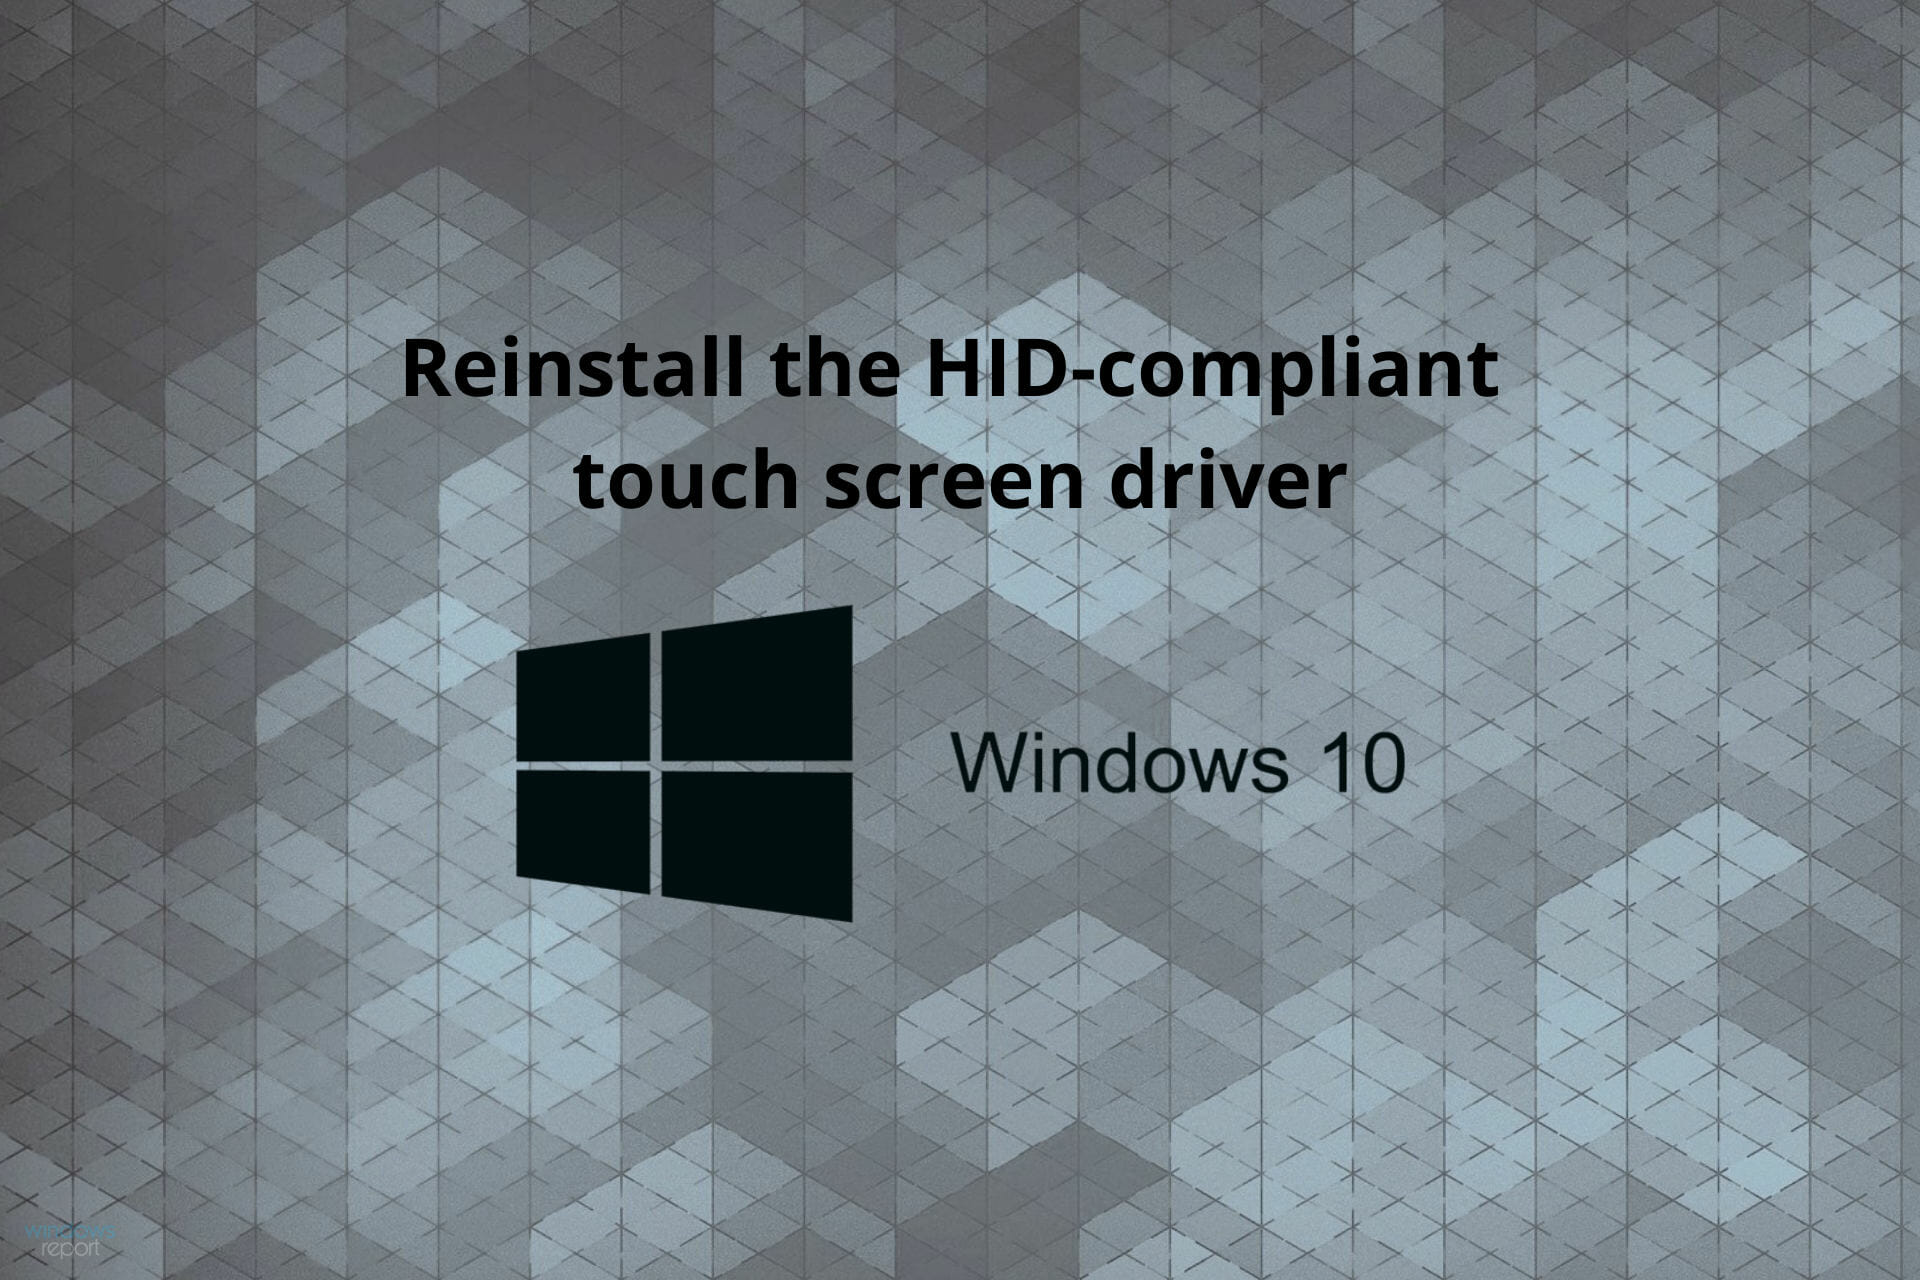 hid compliant touch screen driver download windows 10 lenovo